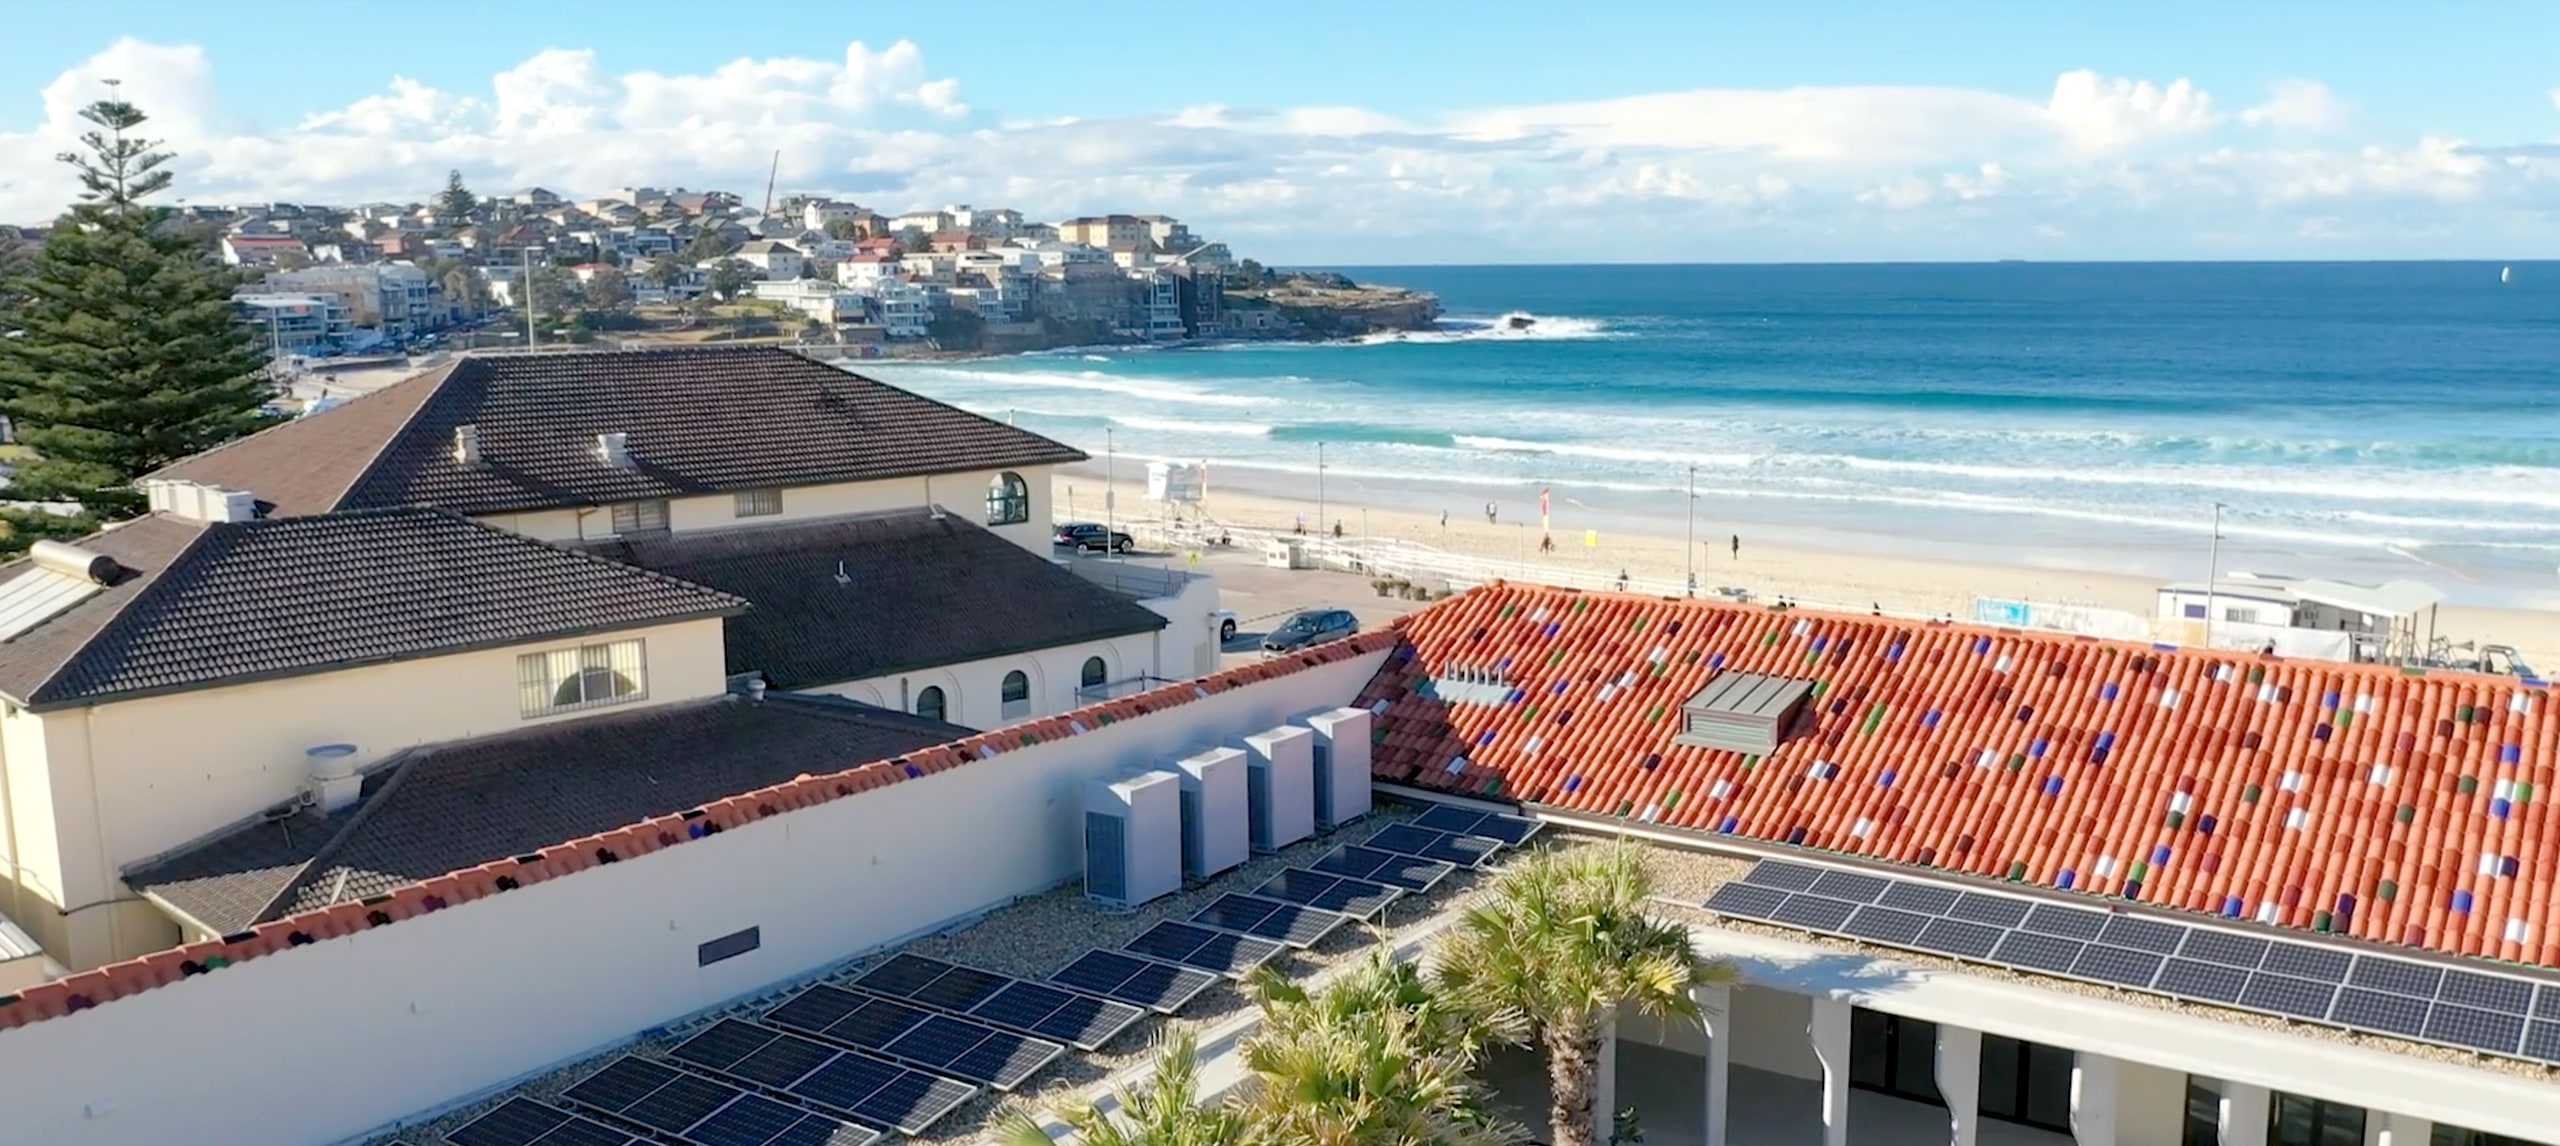 Top view of Bondi Pav courtyard and roof tiles